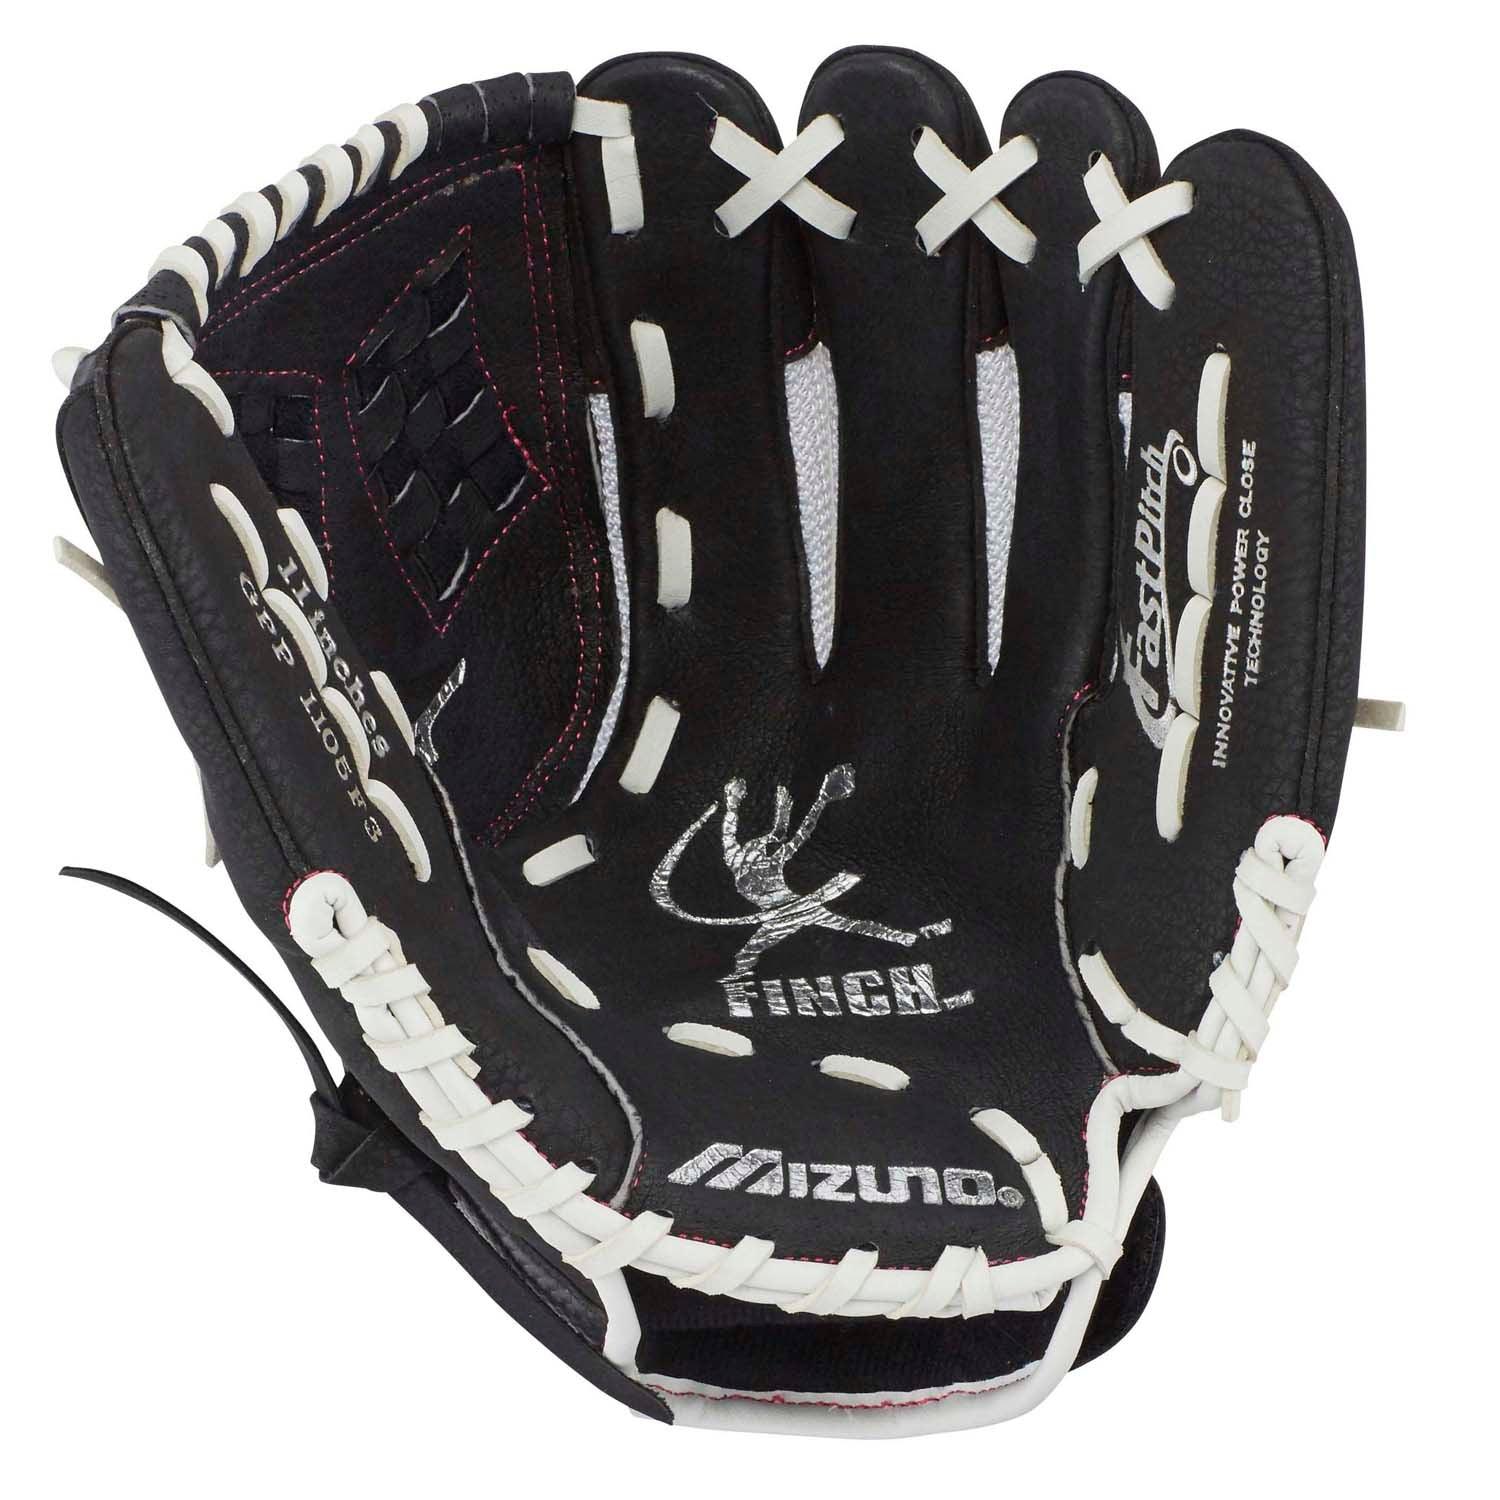 Prospect Finch Series Youth Softball Glove 11" - Youth - Sports Excellence